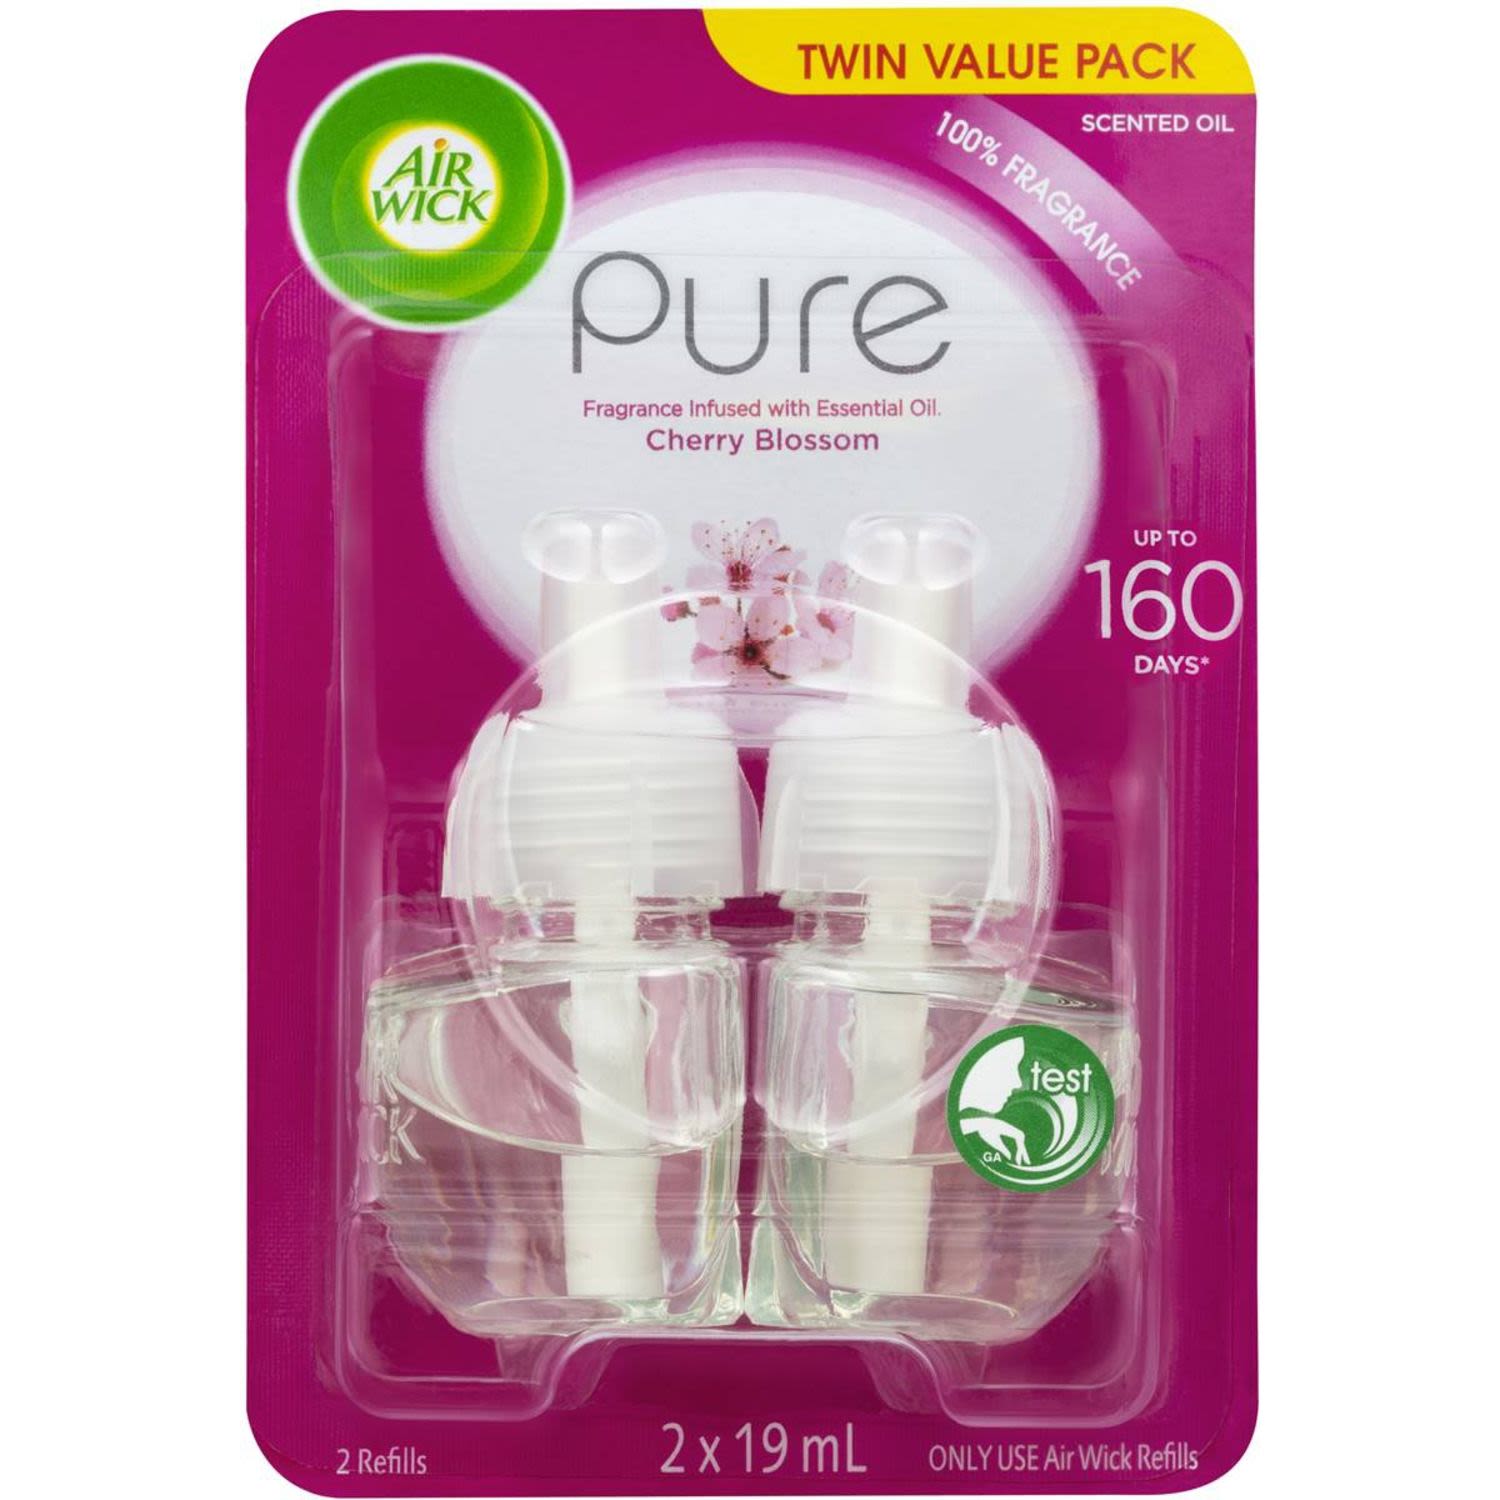 Air Wick Electric Plug In Diffuser Pure Cherry Blossom Twin Refill- Enhance your home with the delicately fresh and enchanting scent of Cherry Blossom. Evocative of a gentle spring breeze, petally fresh floral aromas harmonise with waterfruit notes of melon & juicy peach. Vibrant fragrance for up to 160 days per pack (based on 8 hours daily usage on minimum setting). Consider using in… Bedroom, Living Room, Bathroom, Kitchen, Laundry, Office.<br /> <br />